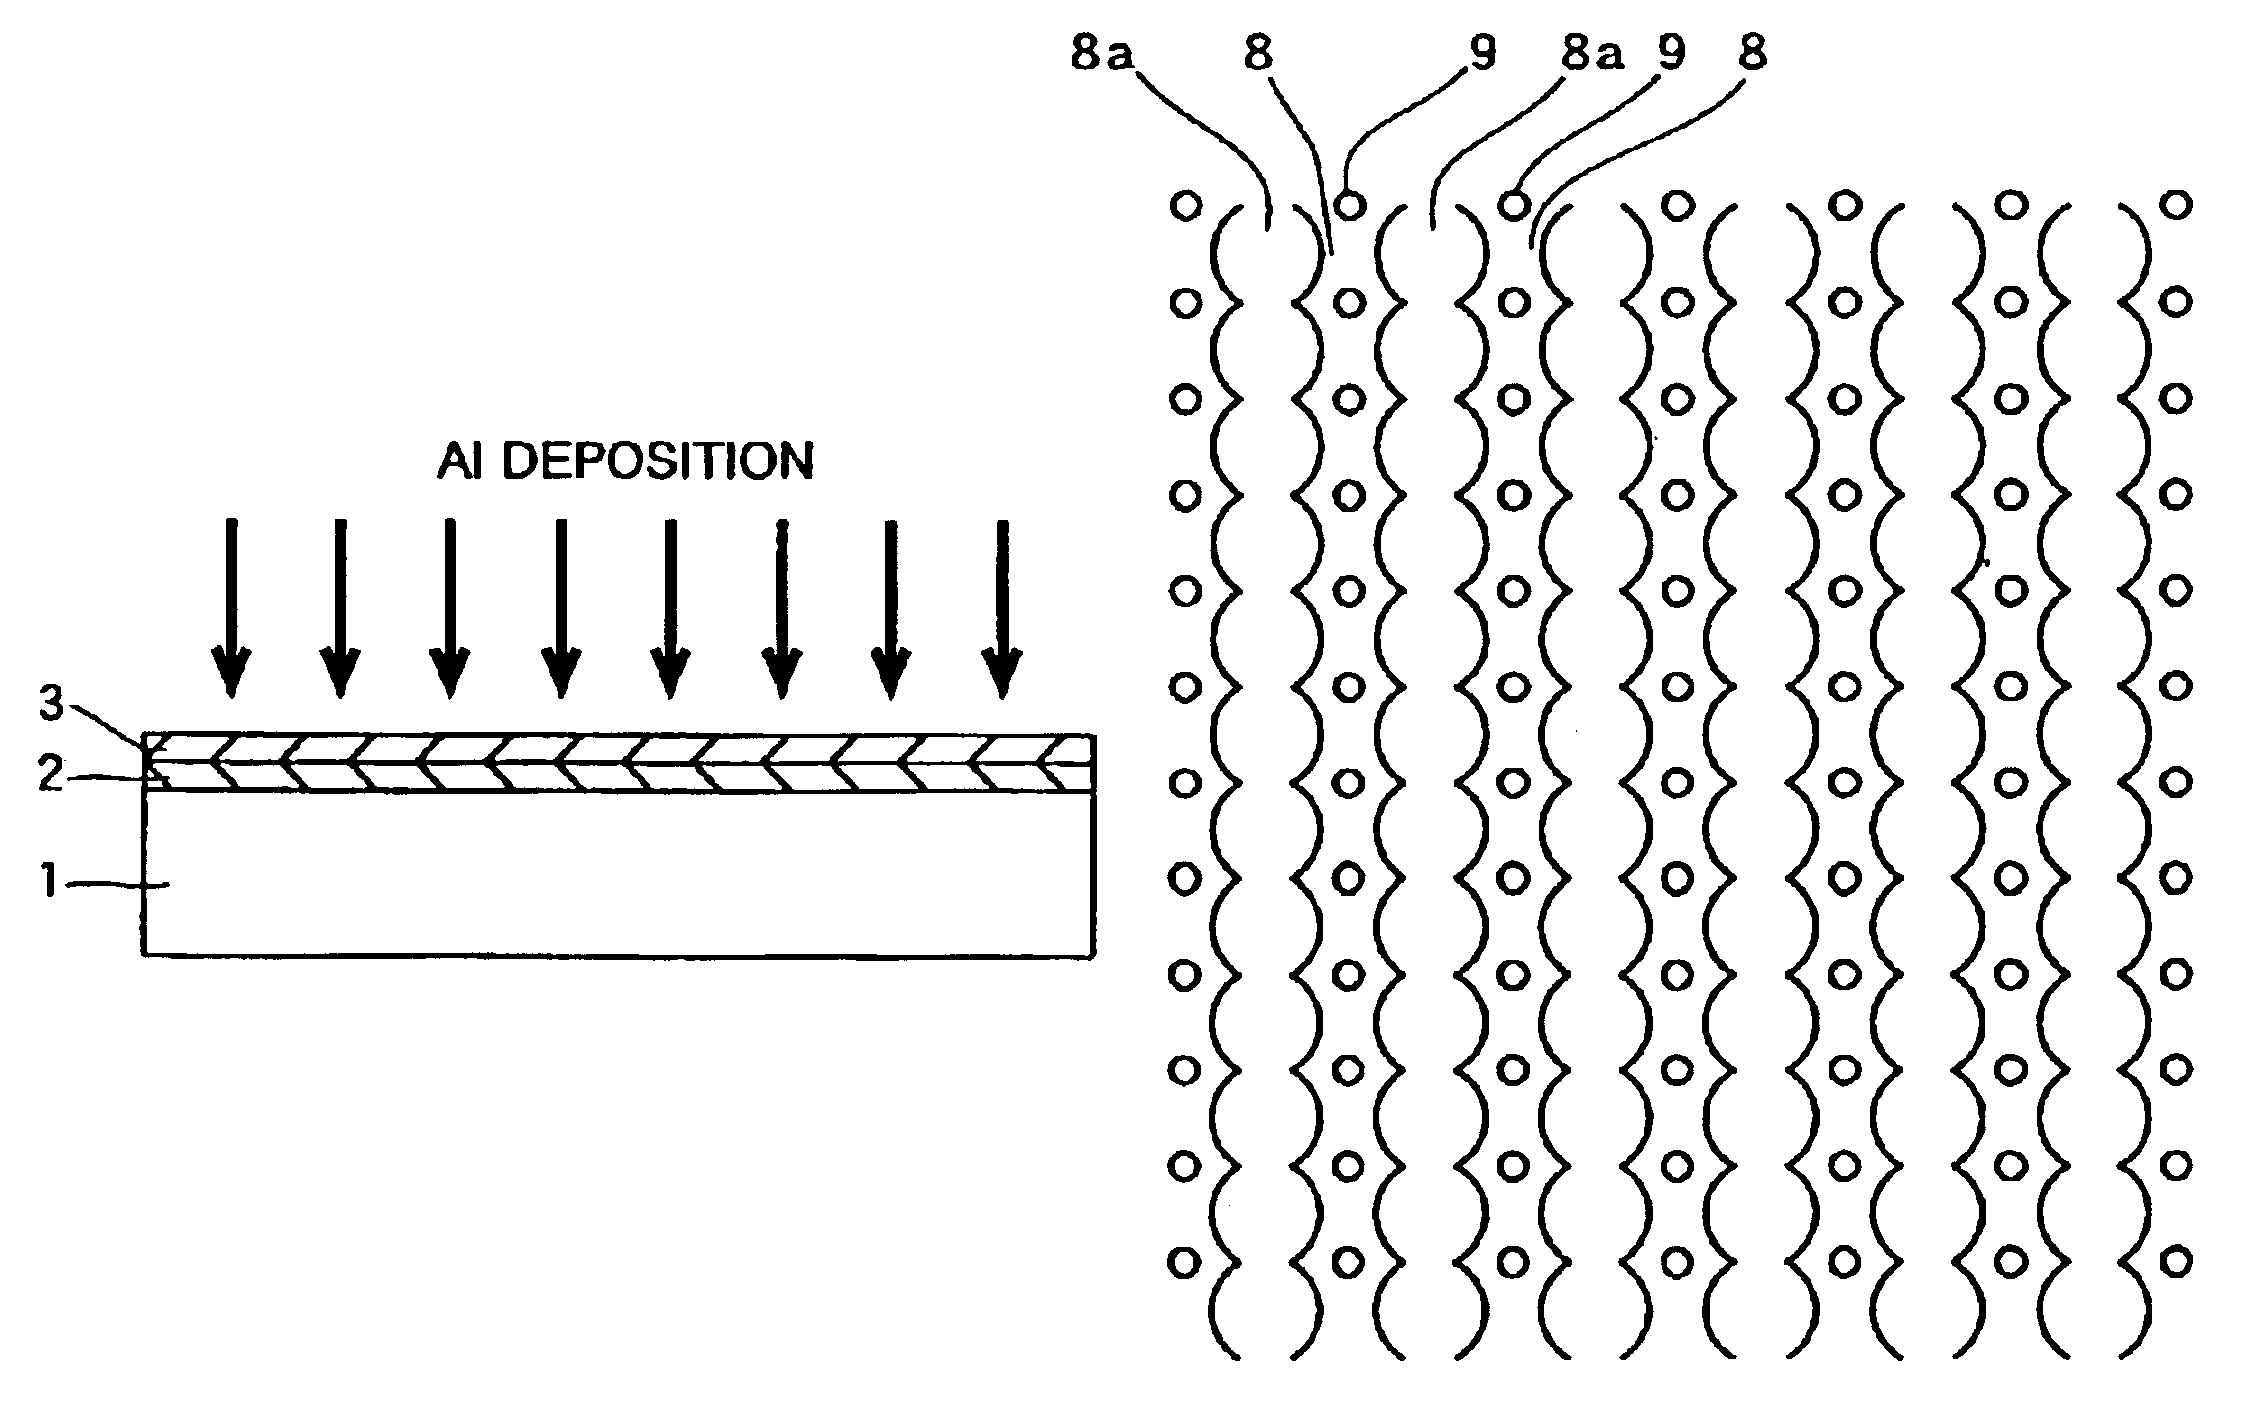 Method of forming grating microstructures by anodic oxidation